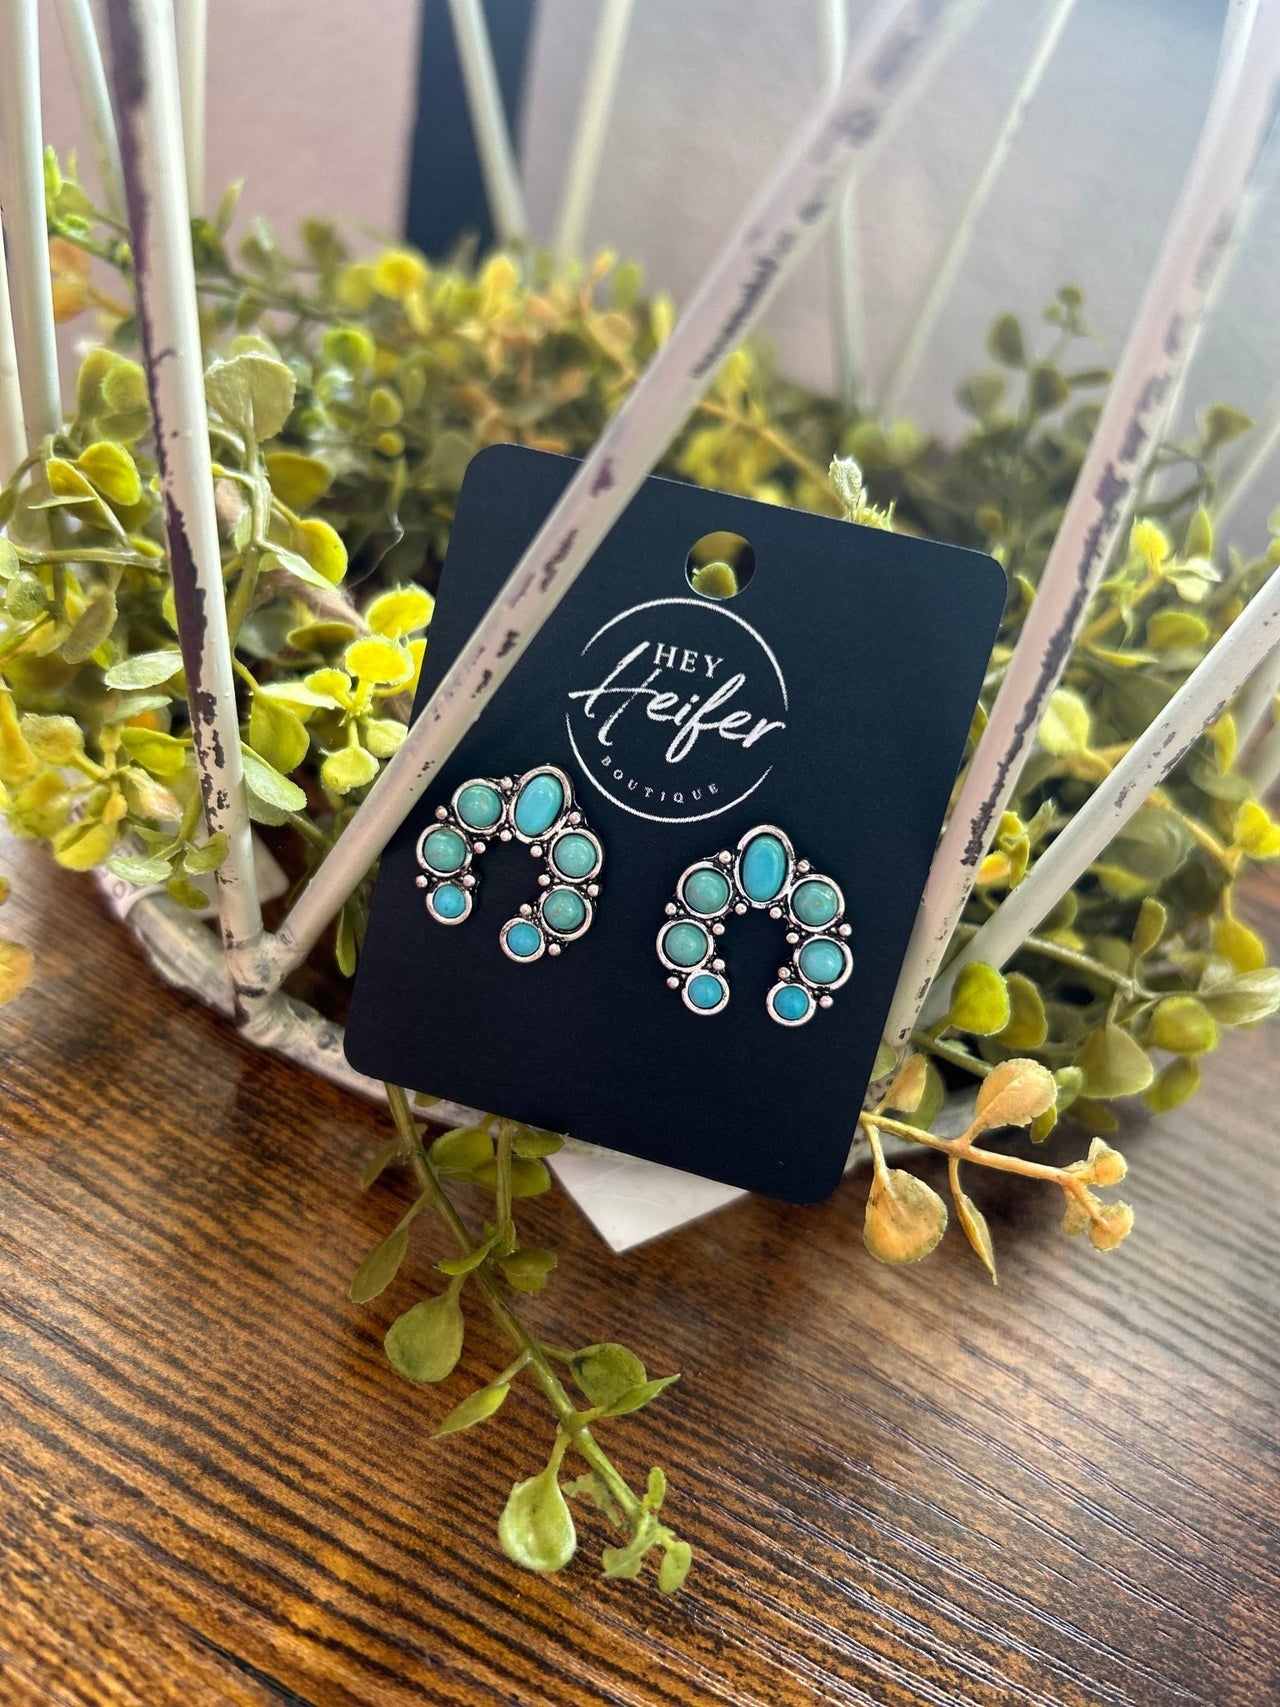 The Squash Blooms Mini Earrings - Hey Heifer Boutique